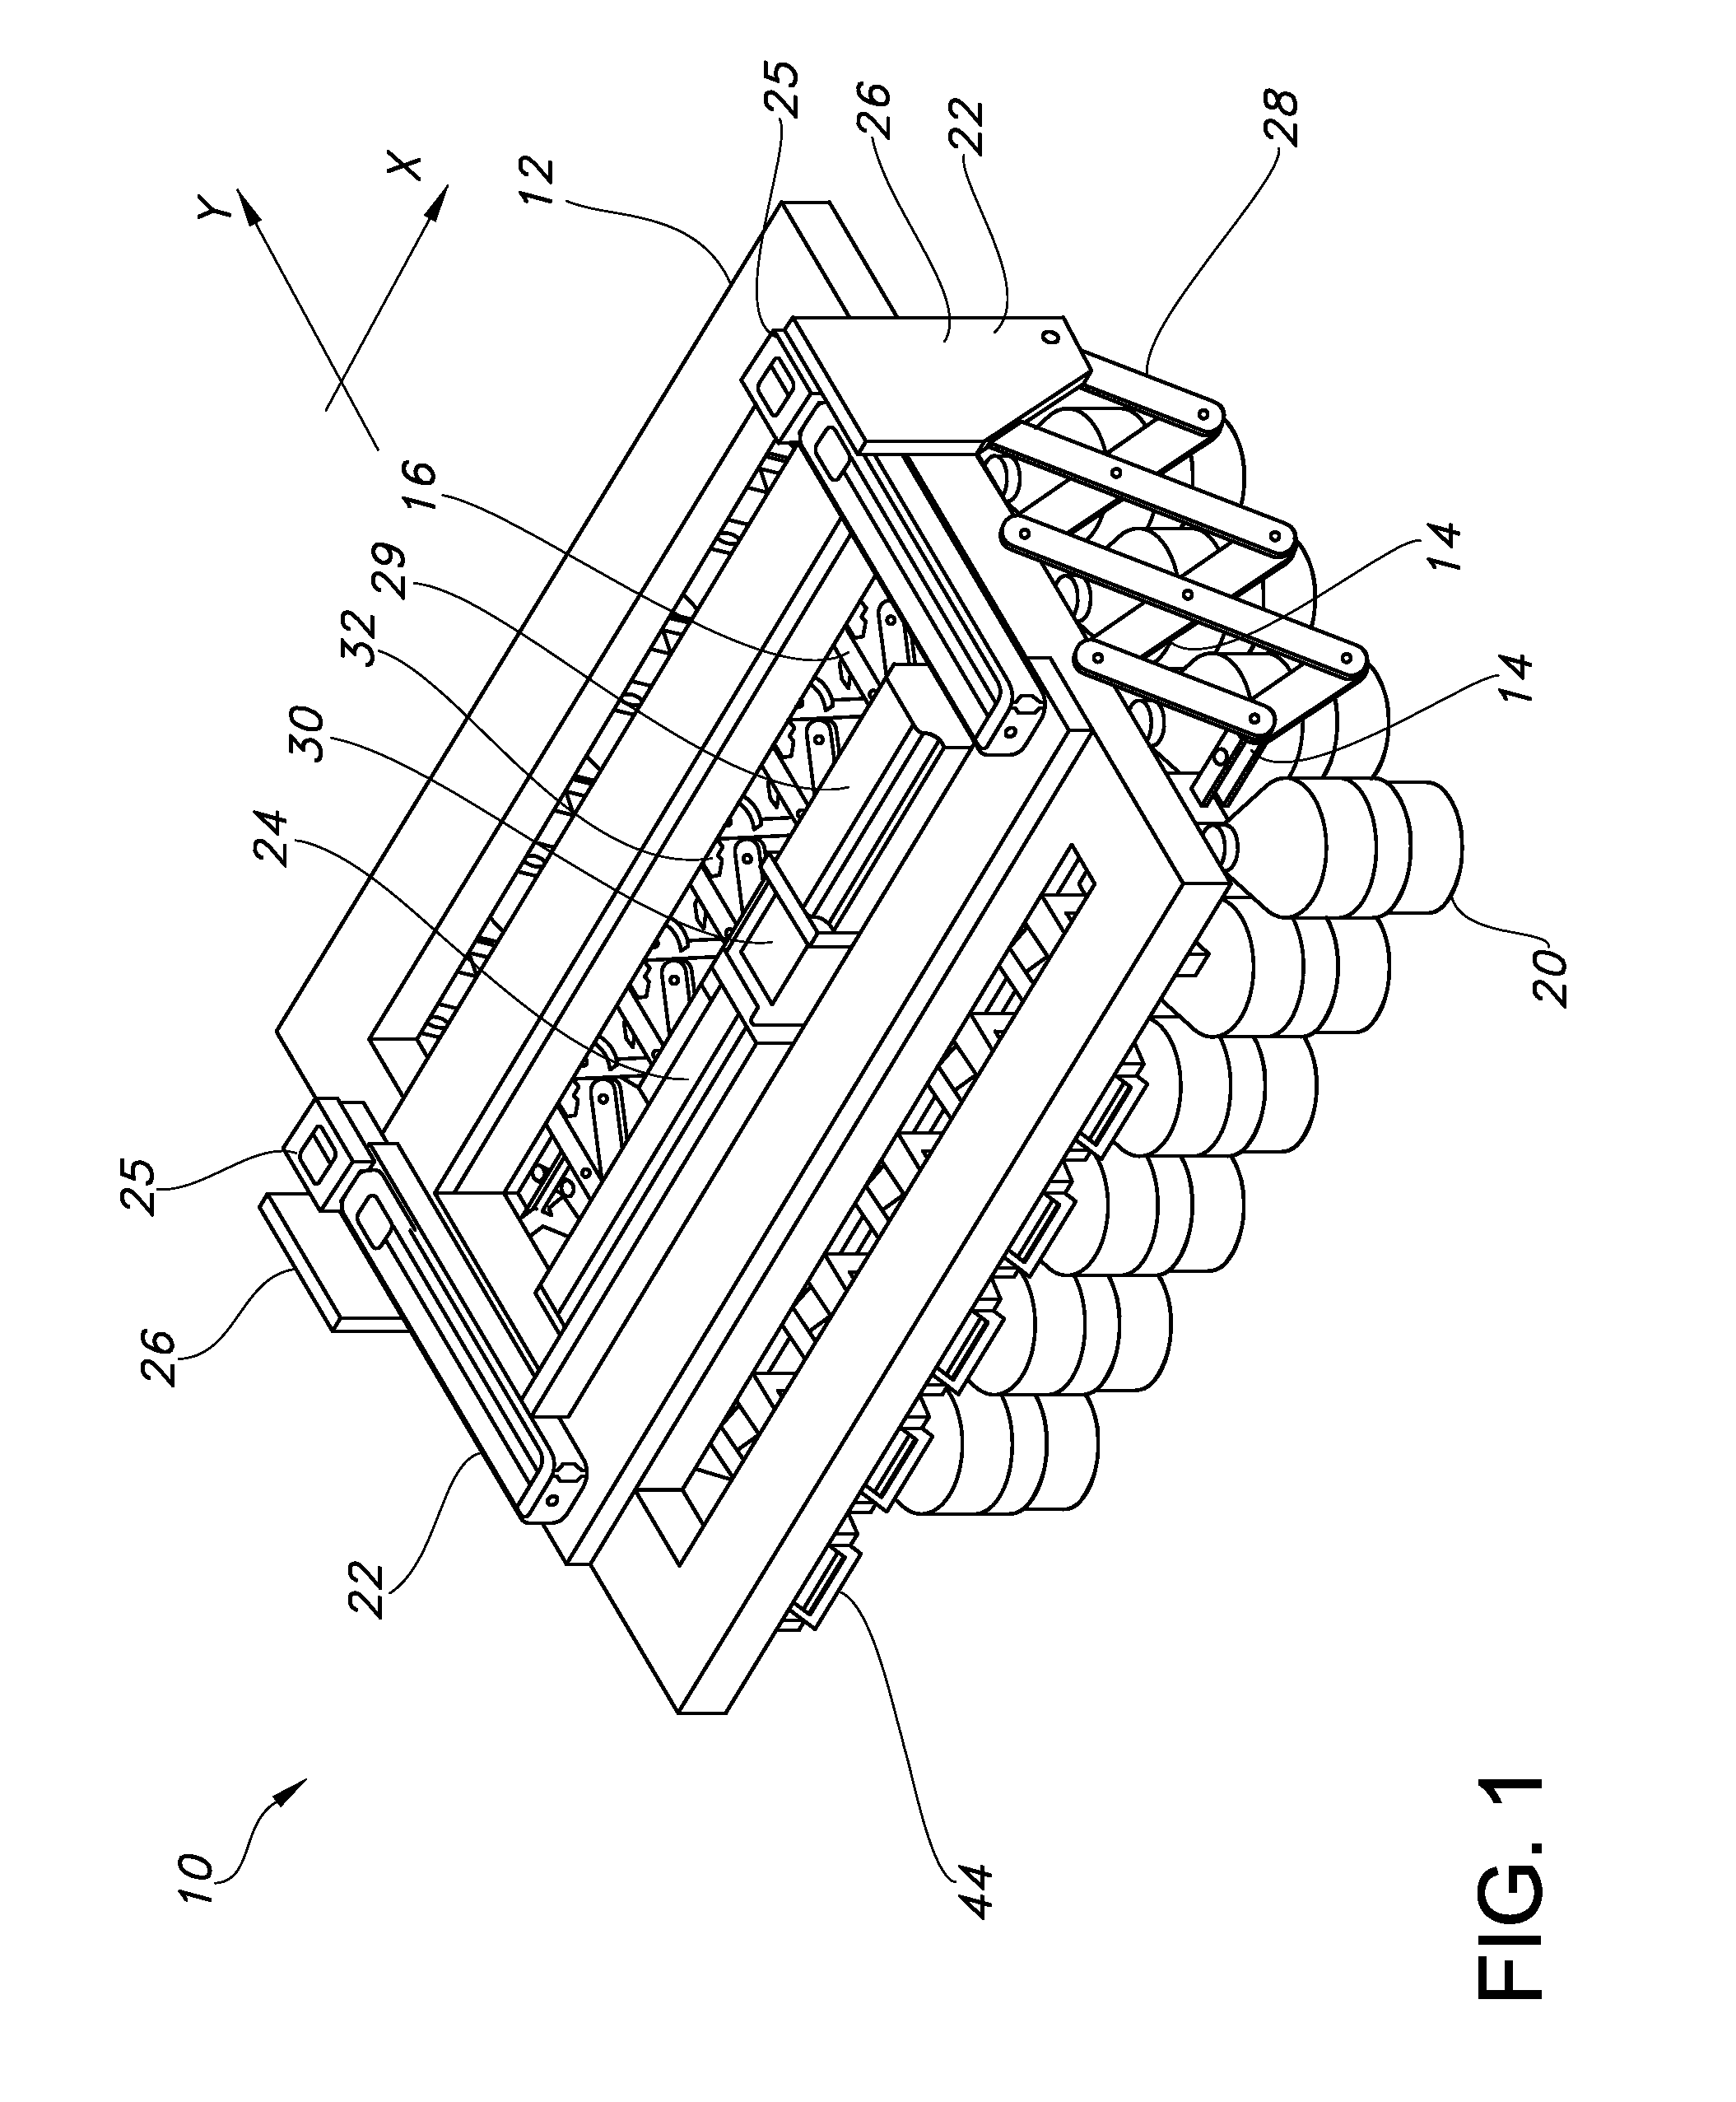 Integrated Two Dimensional Robotic Palm for Variable Pitch Positioning of Multiple Transfer Devices